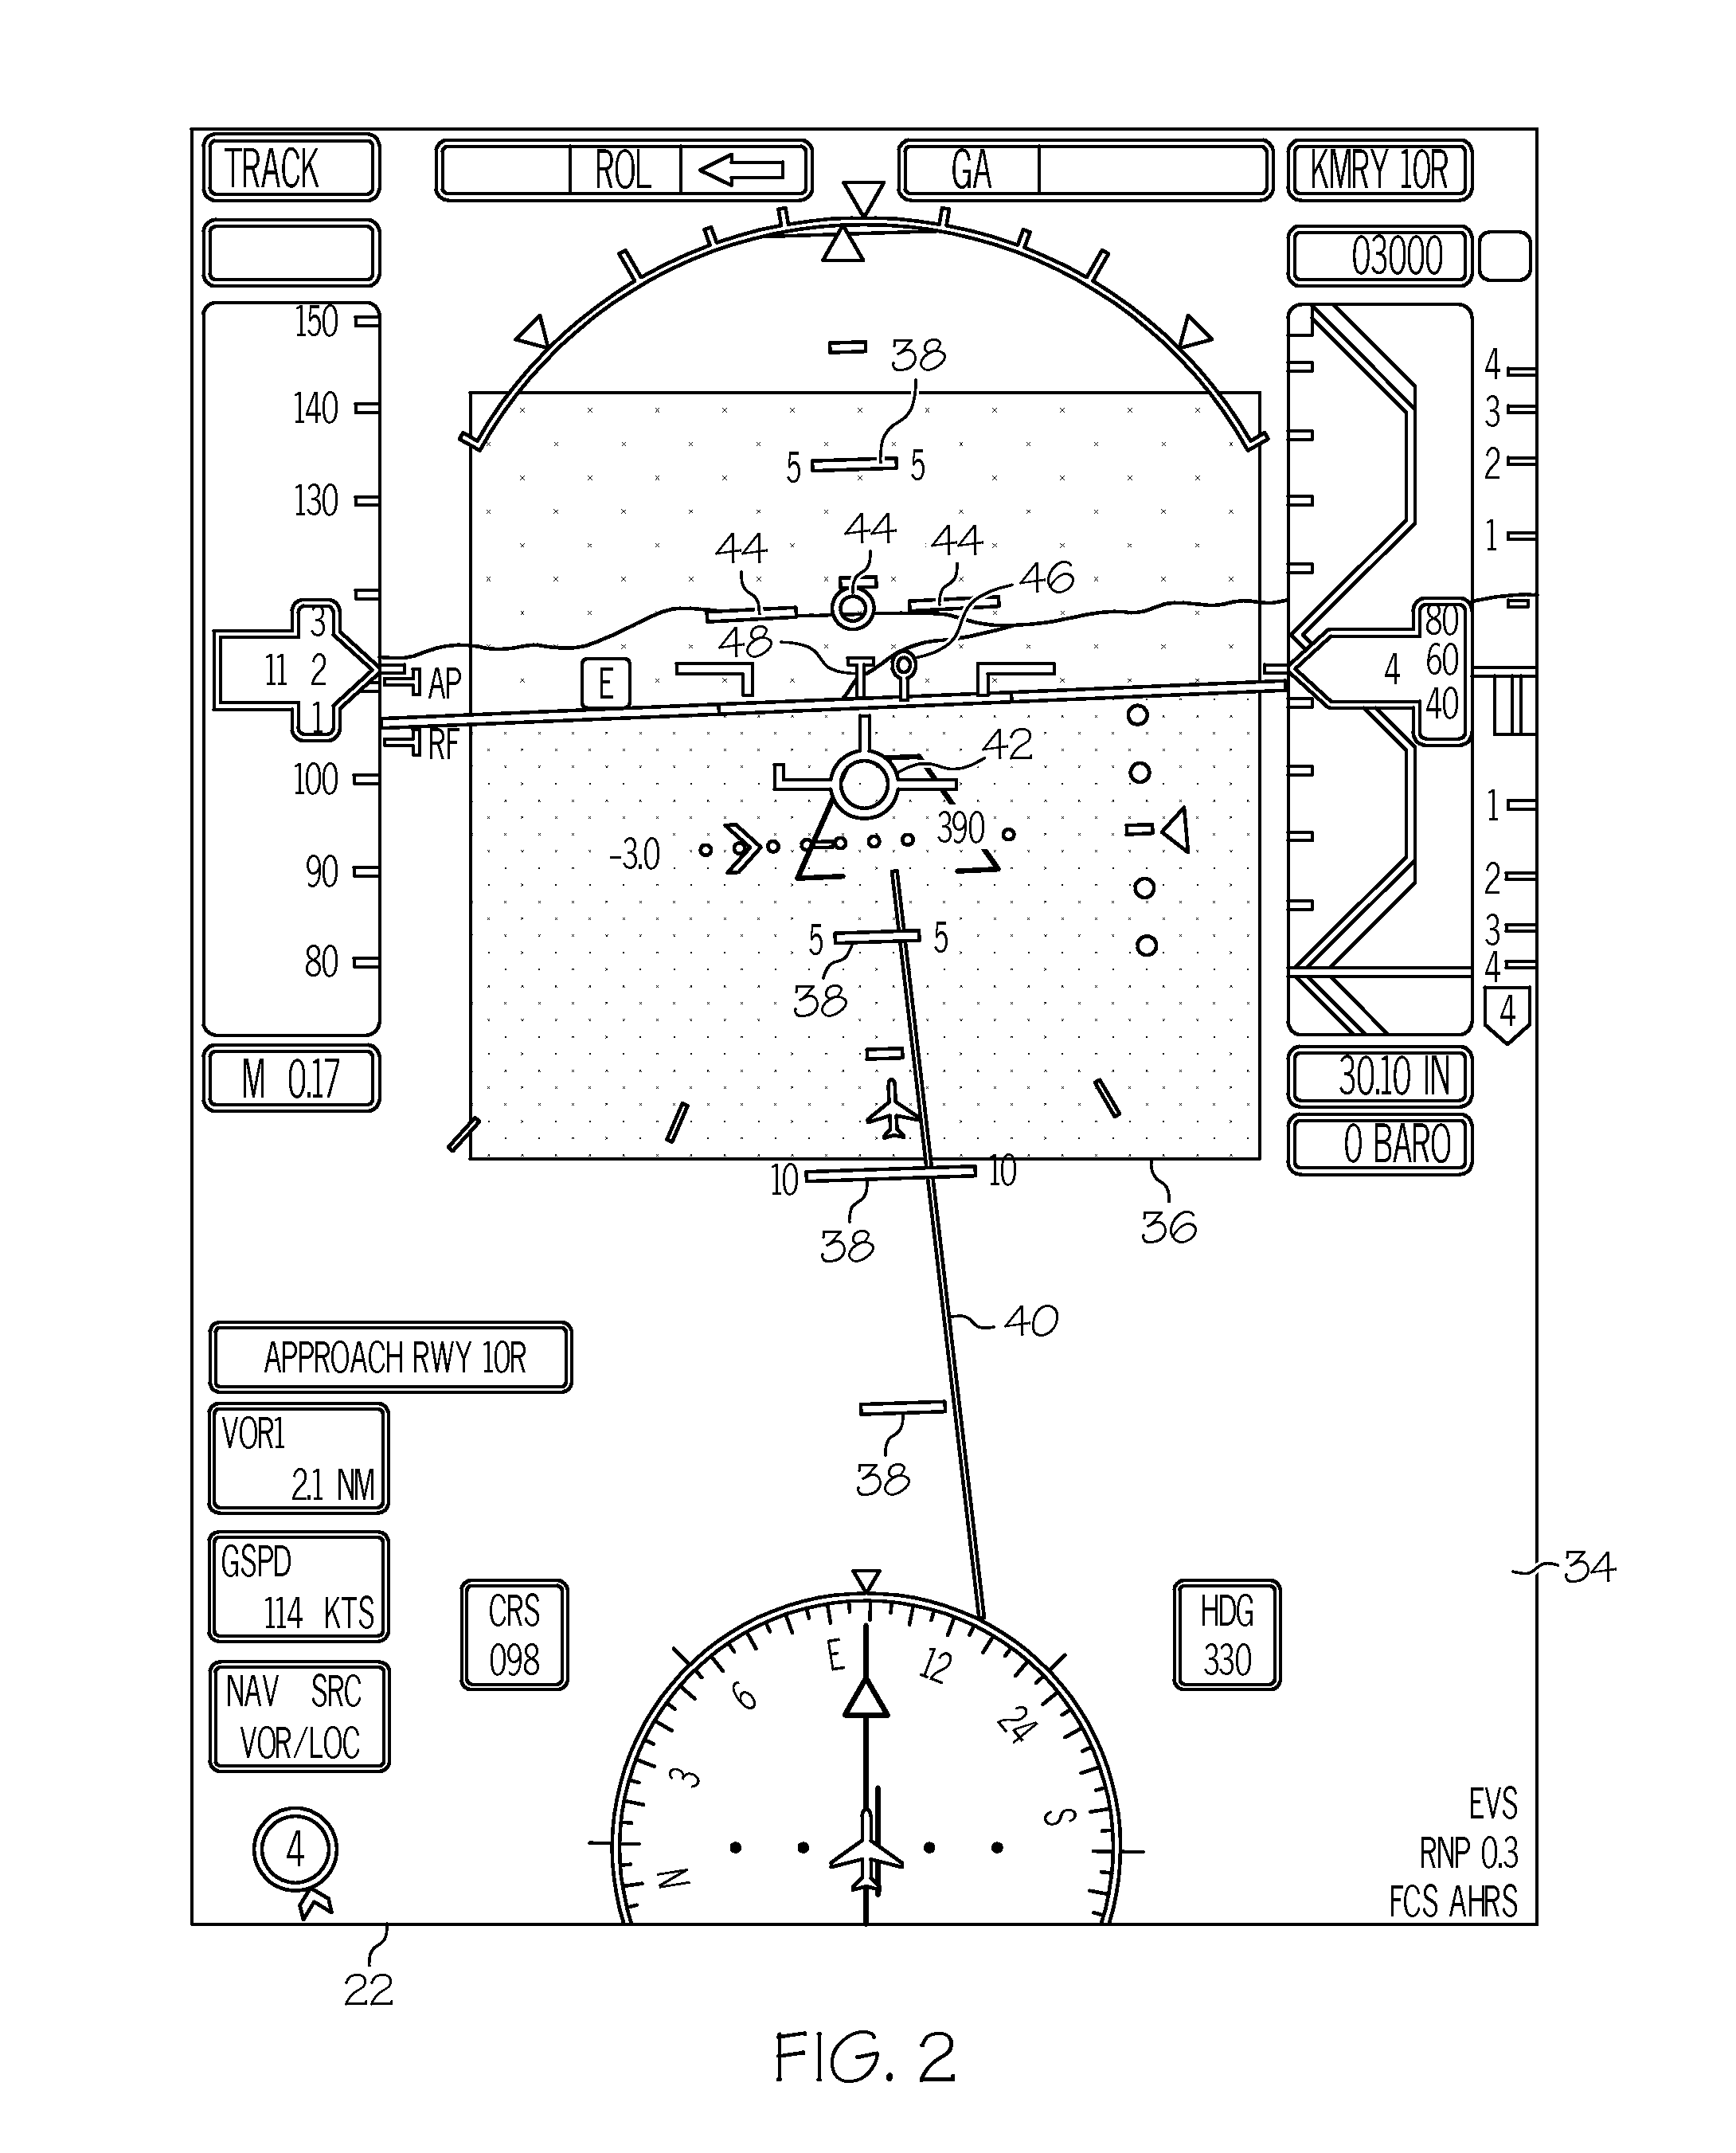 Systems, methods and computer readable media for displaying multiple overlaid images to a pilot of an aircraft during flight